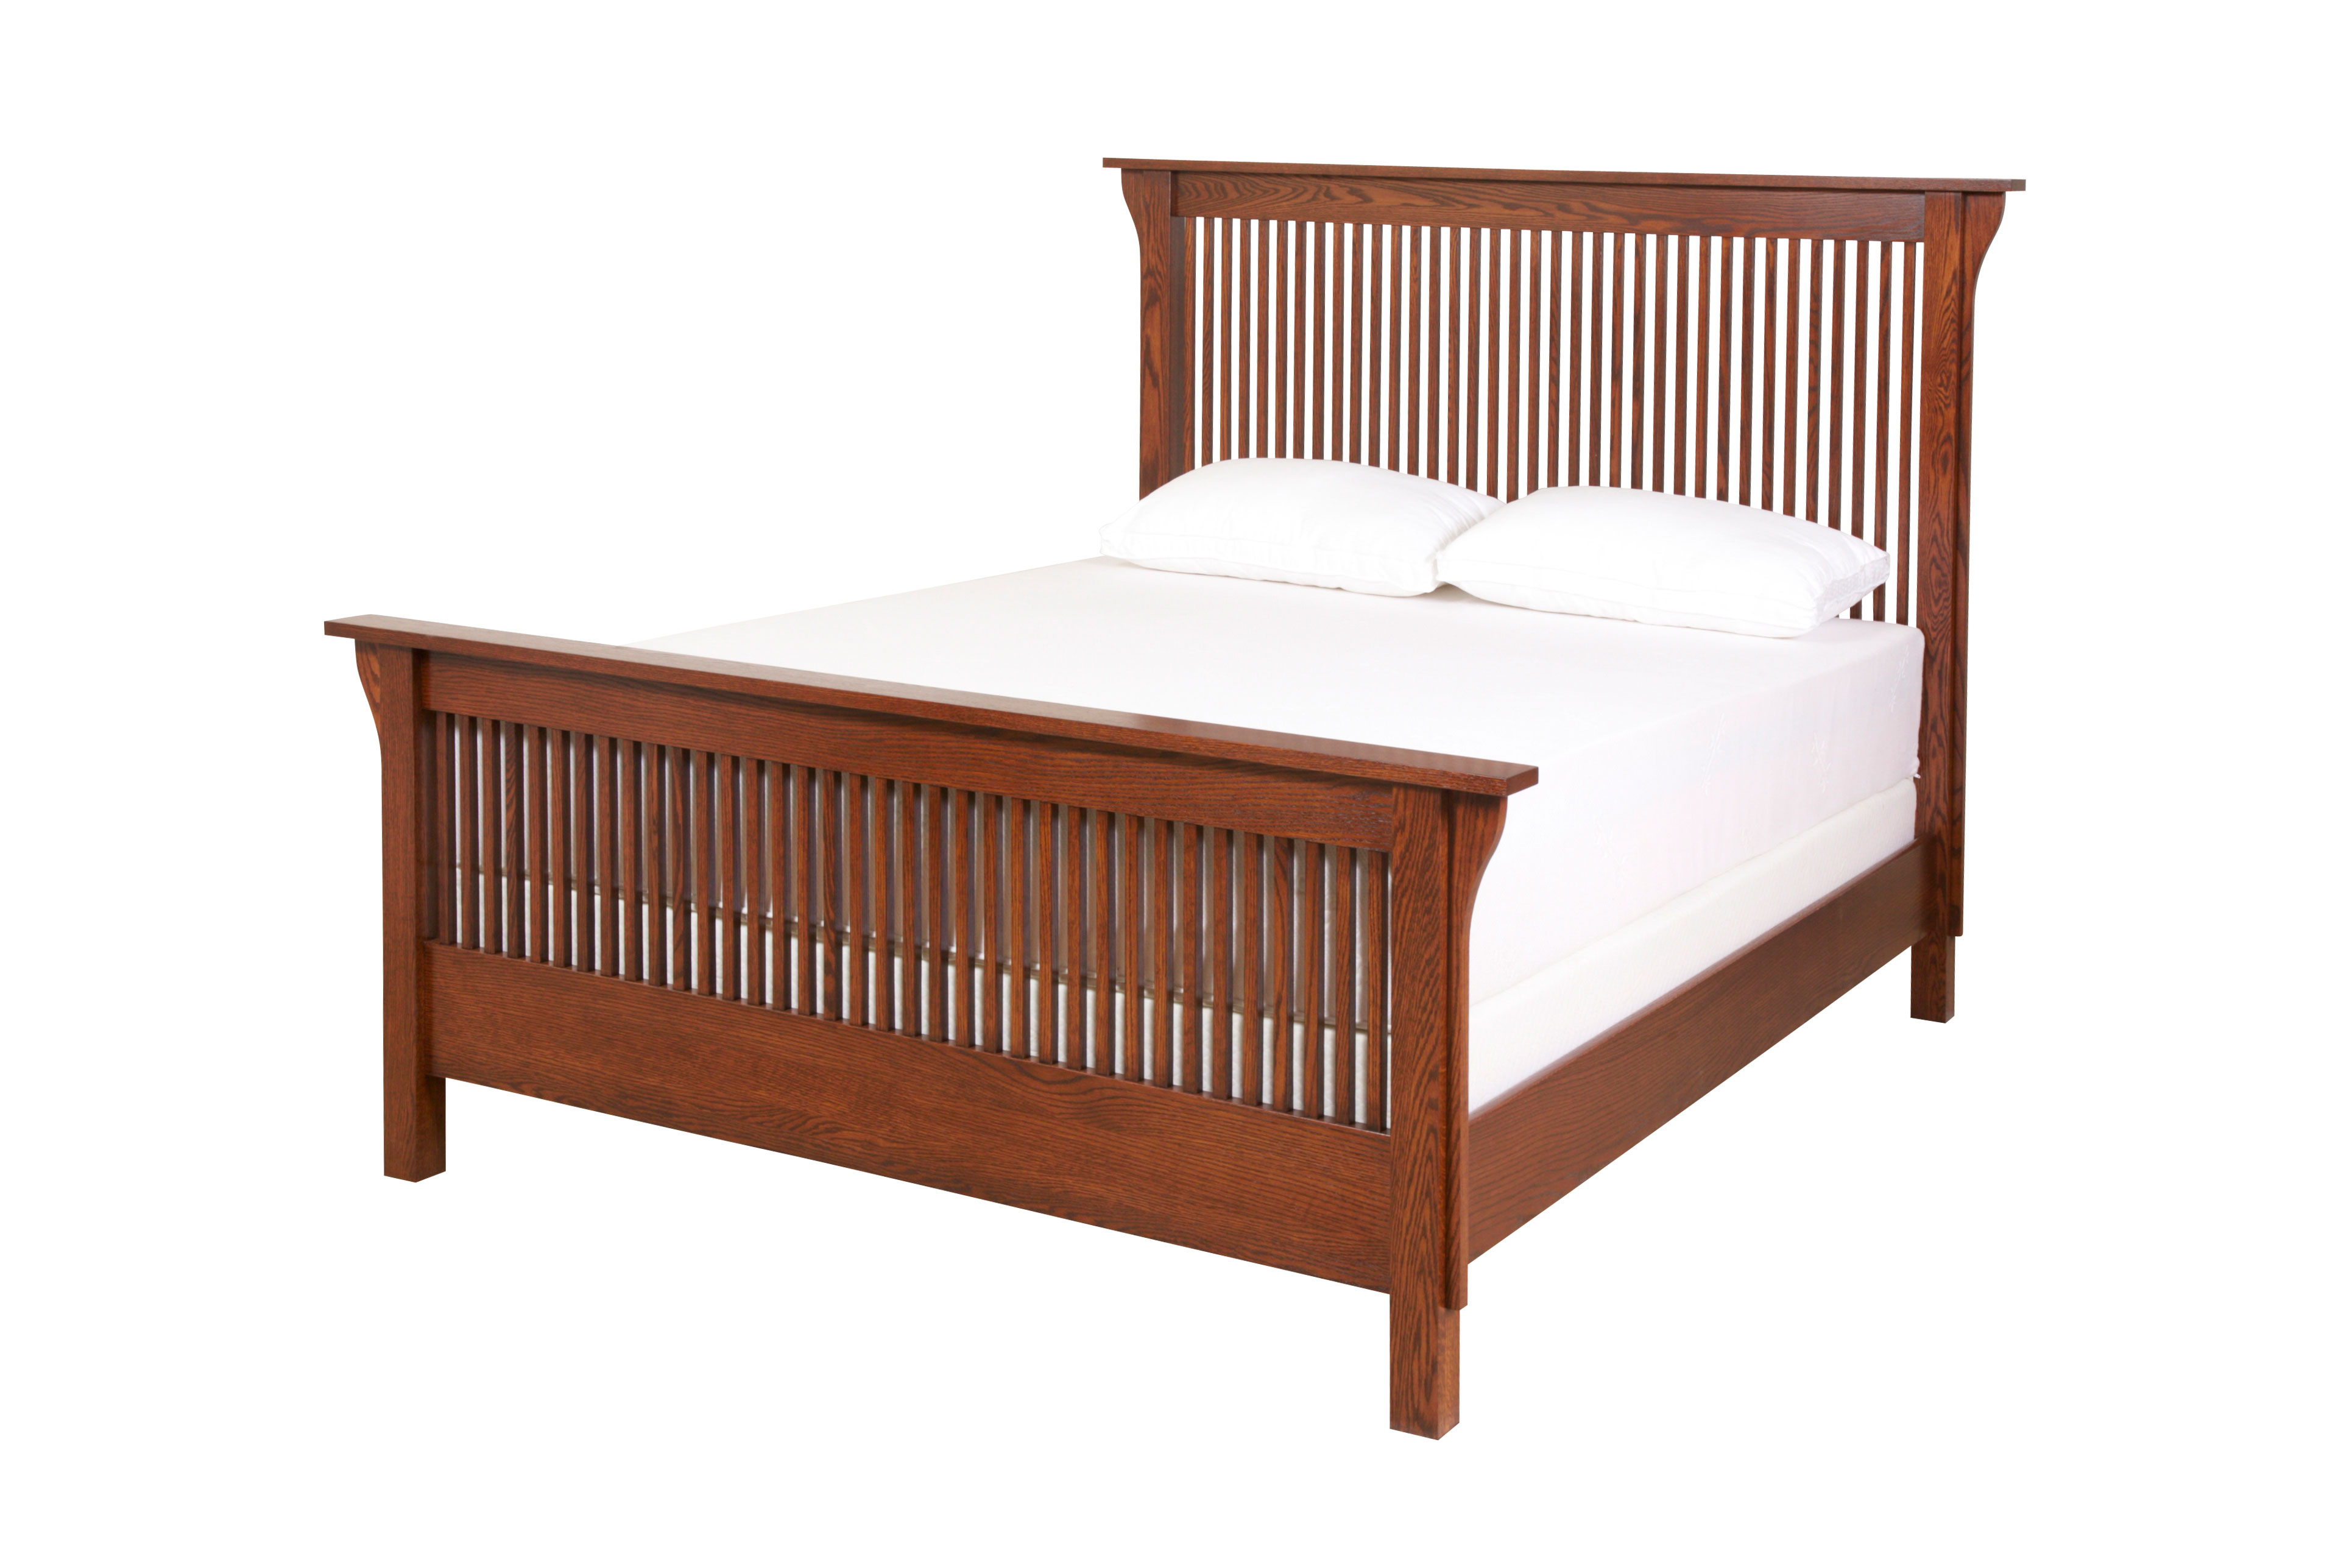 Heirloom Mission Bed Creative Home, Mission Bed Frame Queen